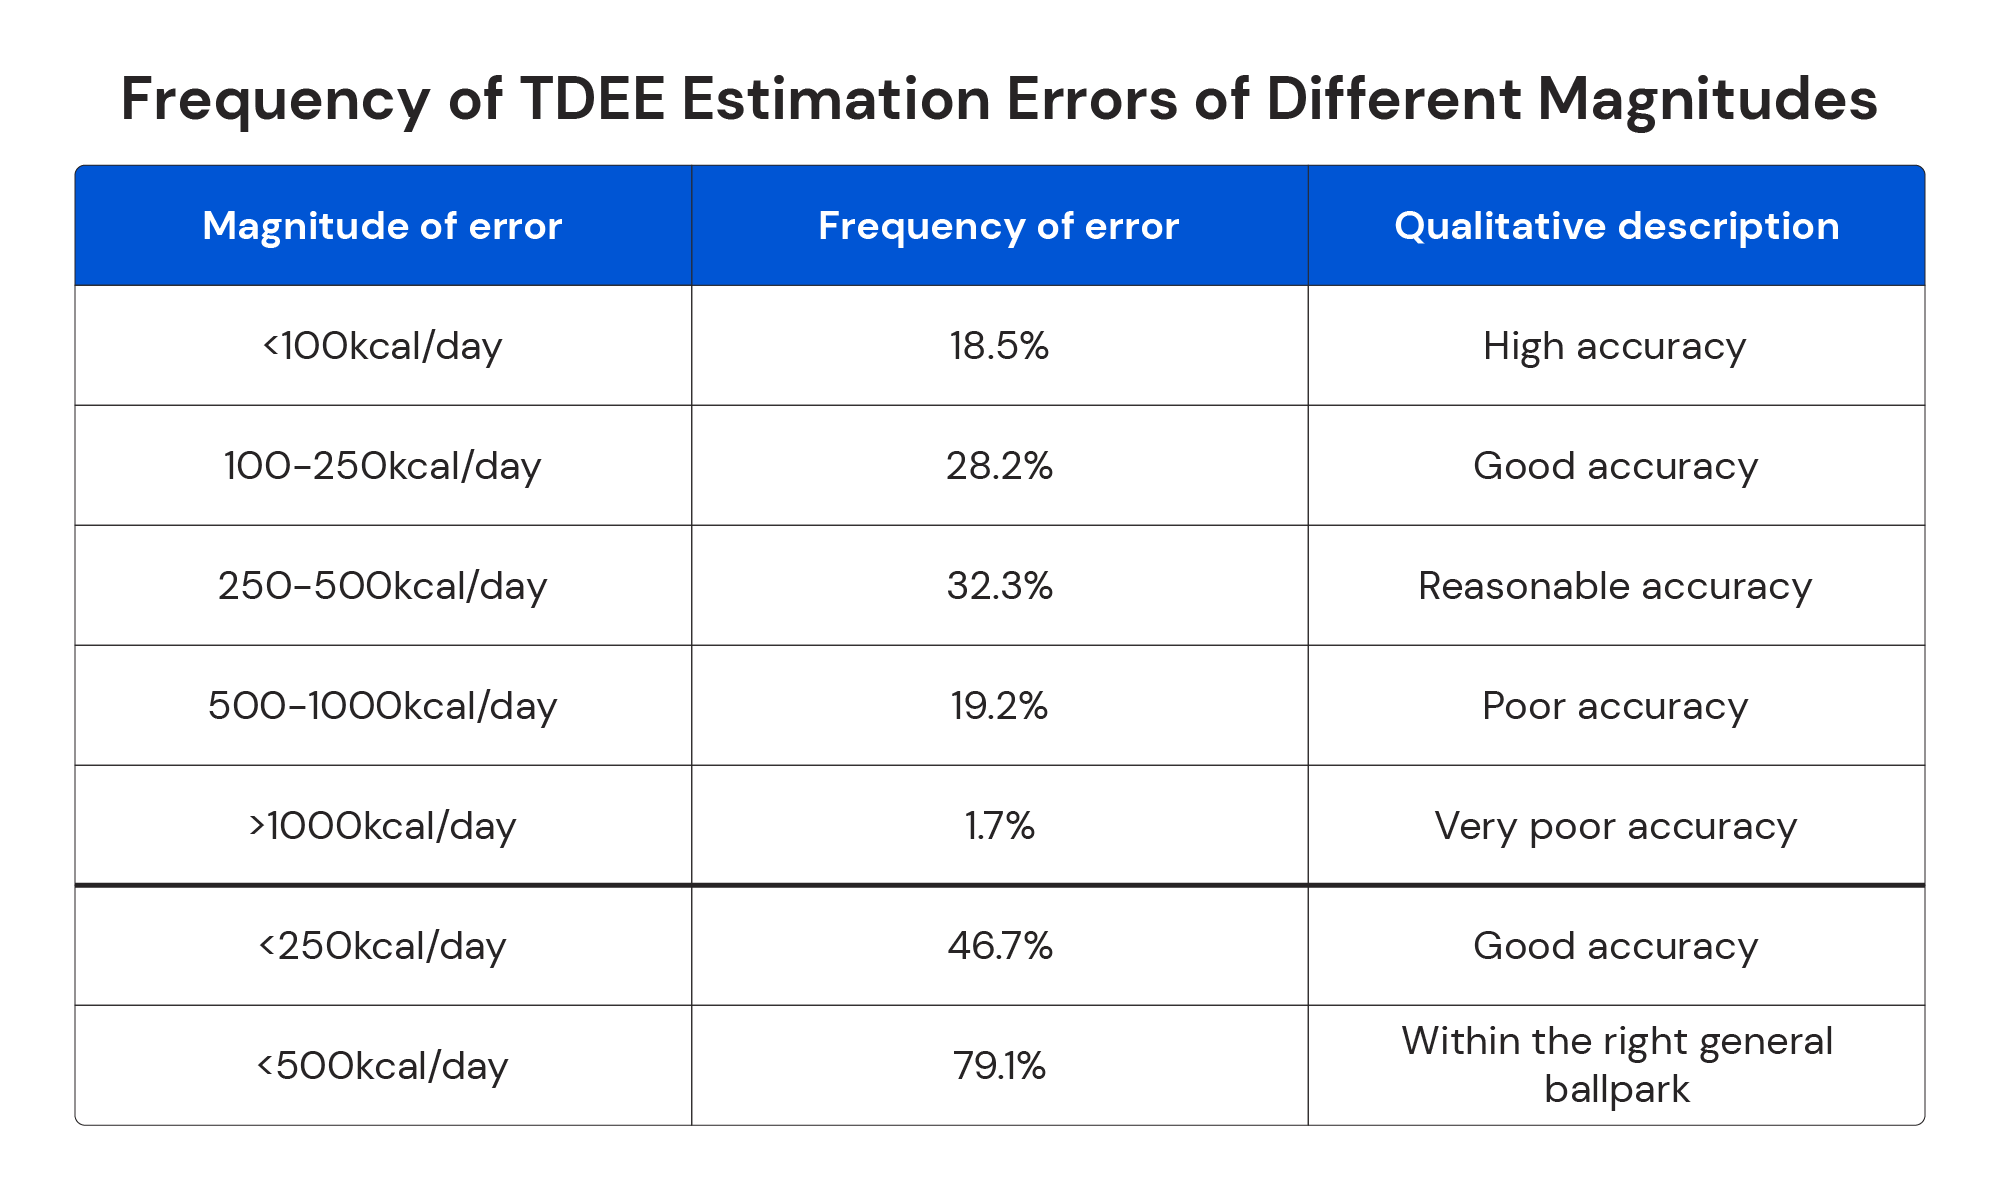 Frequency of TDEE estimation errors of different magnitudes